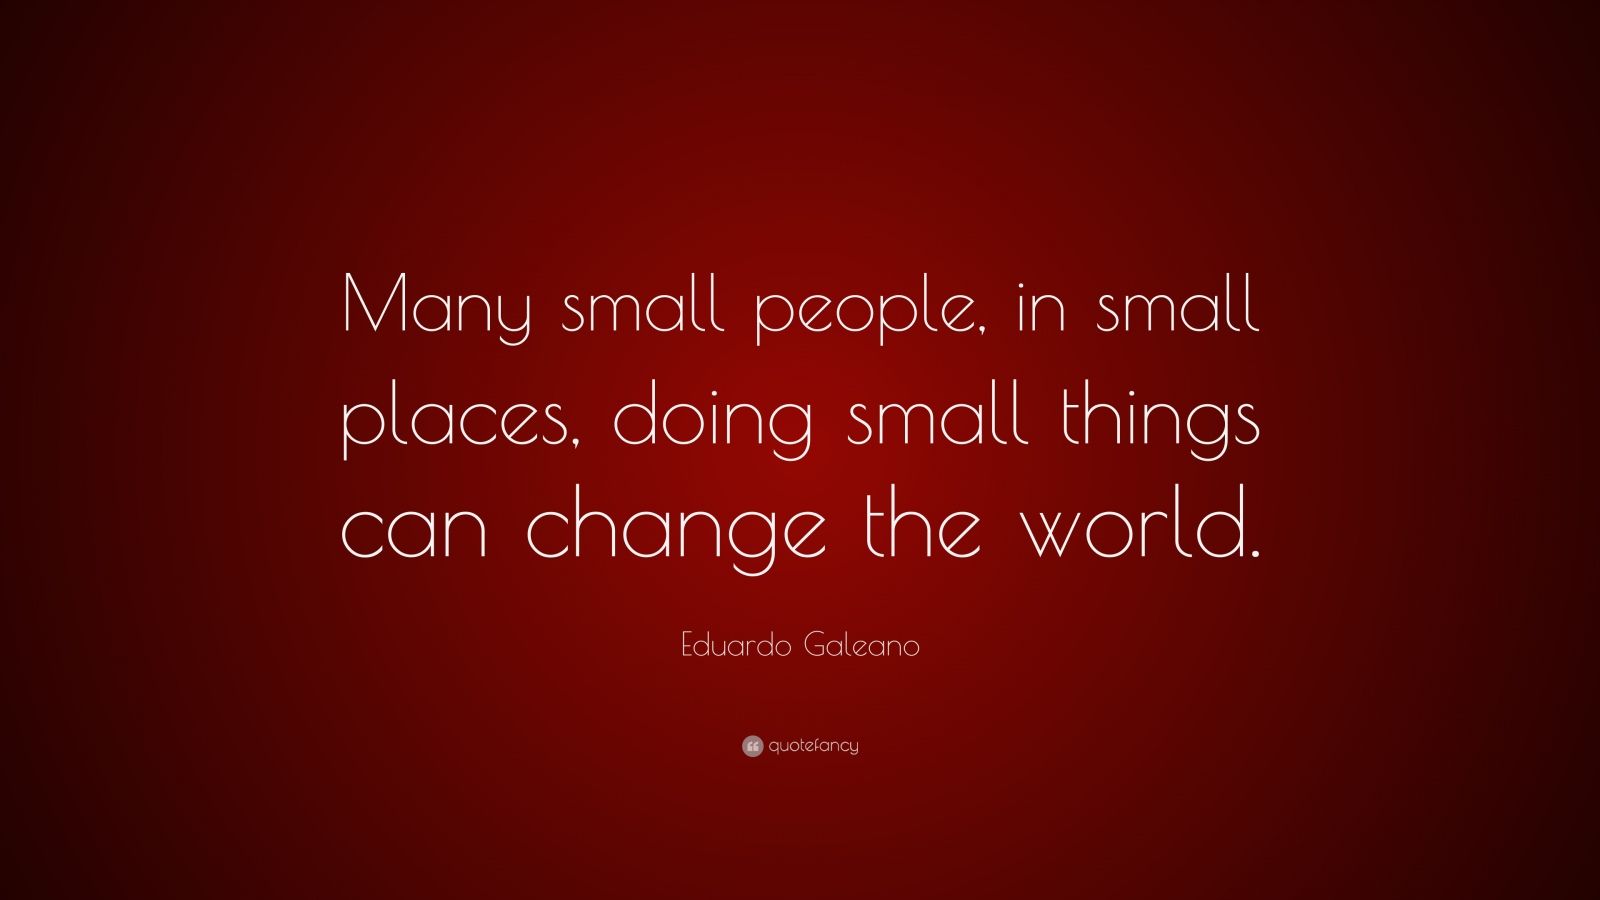 Eduardo Galeano Quote: “Many small people, in small places, doing small